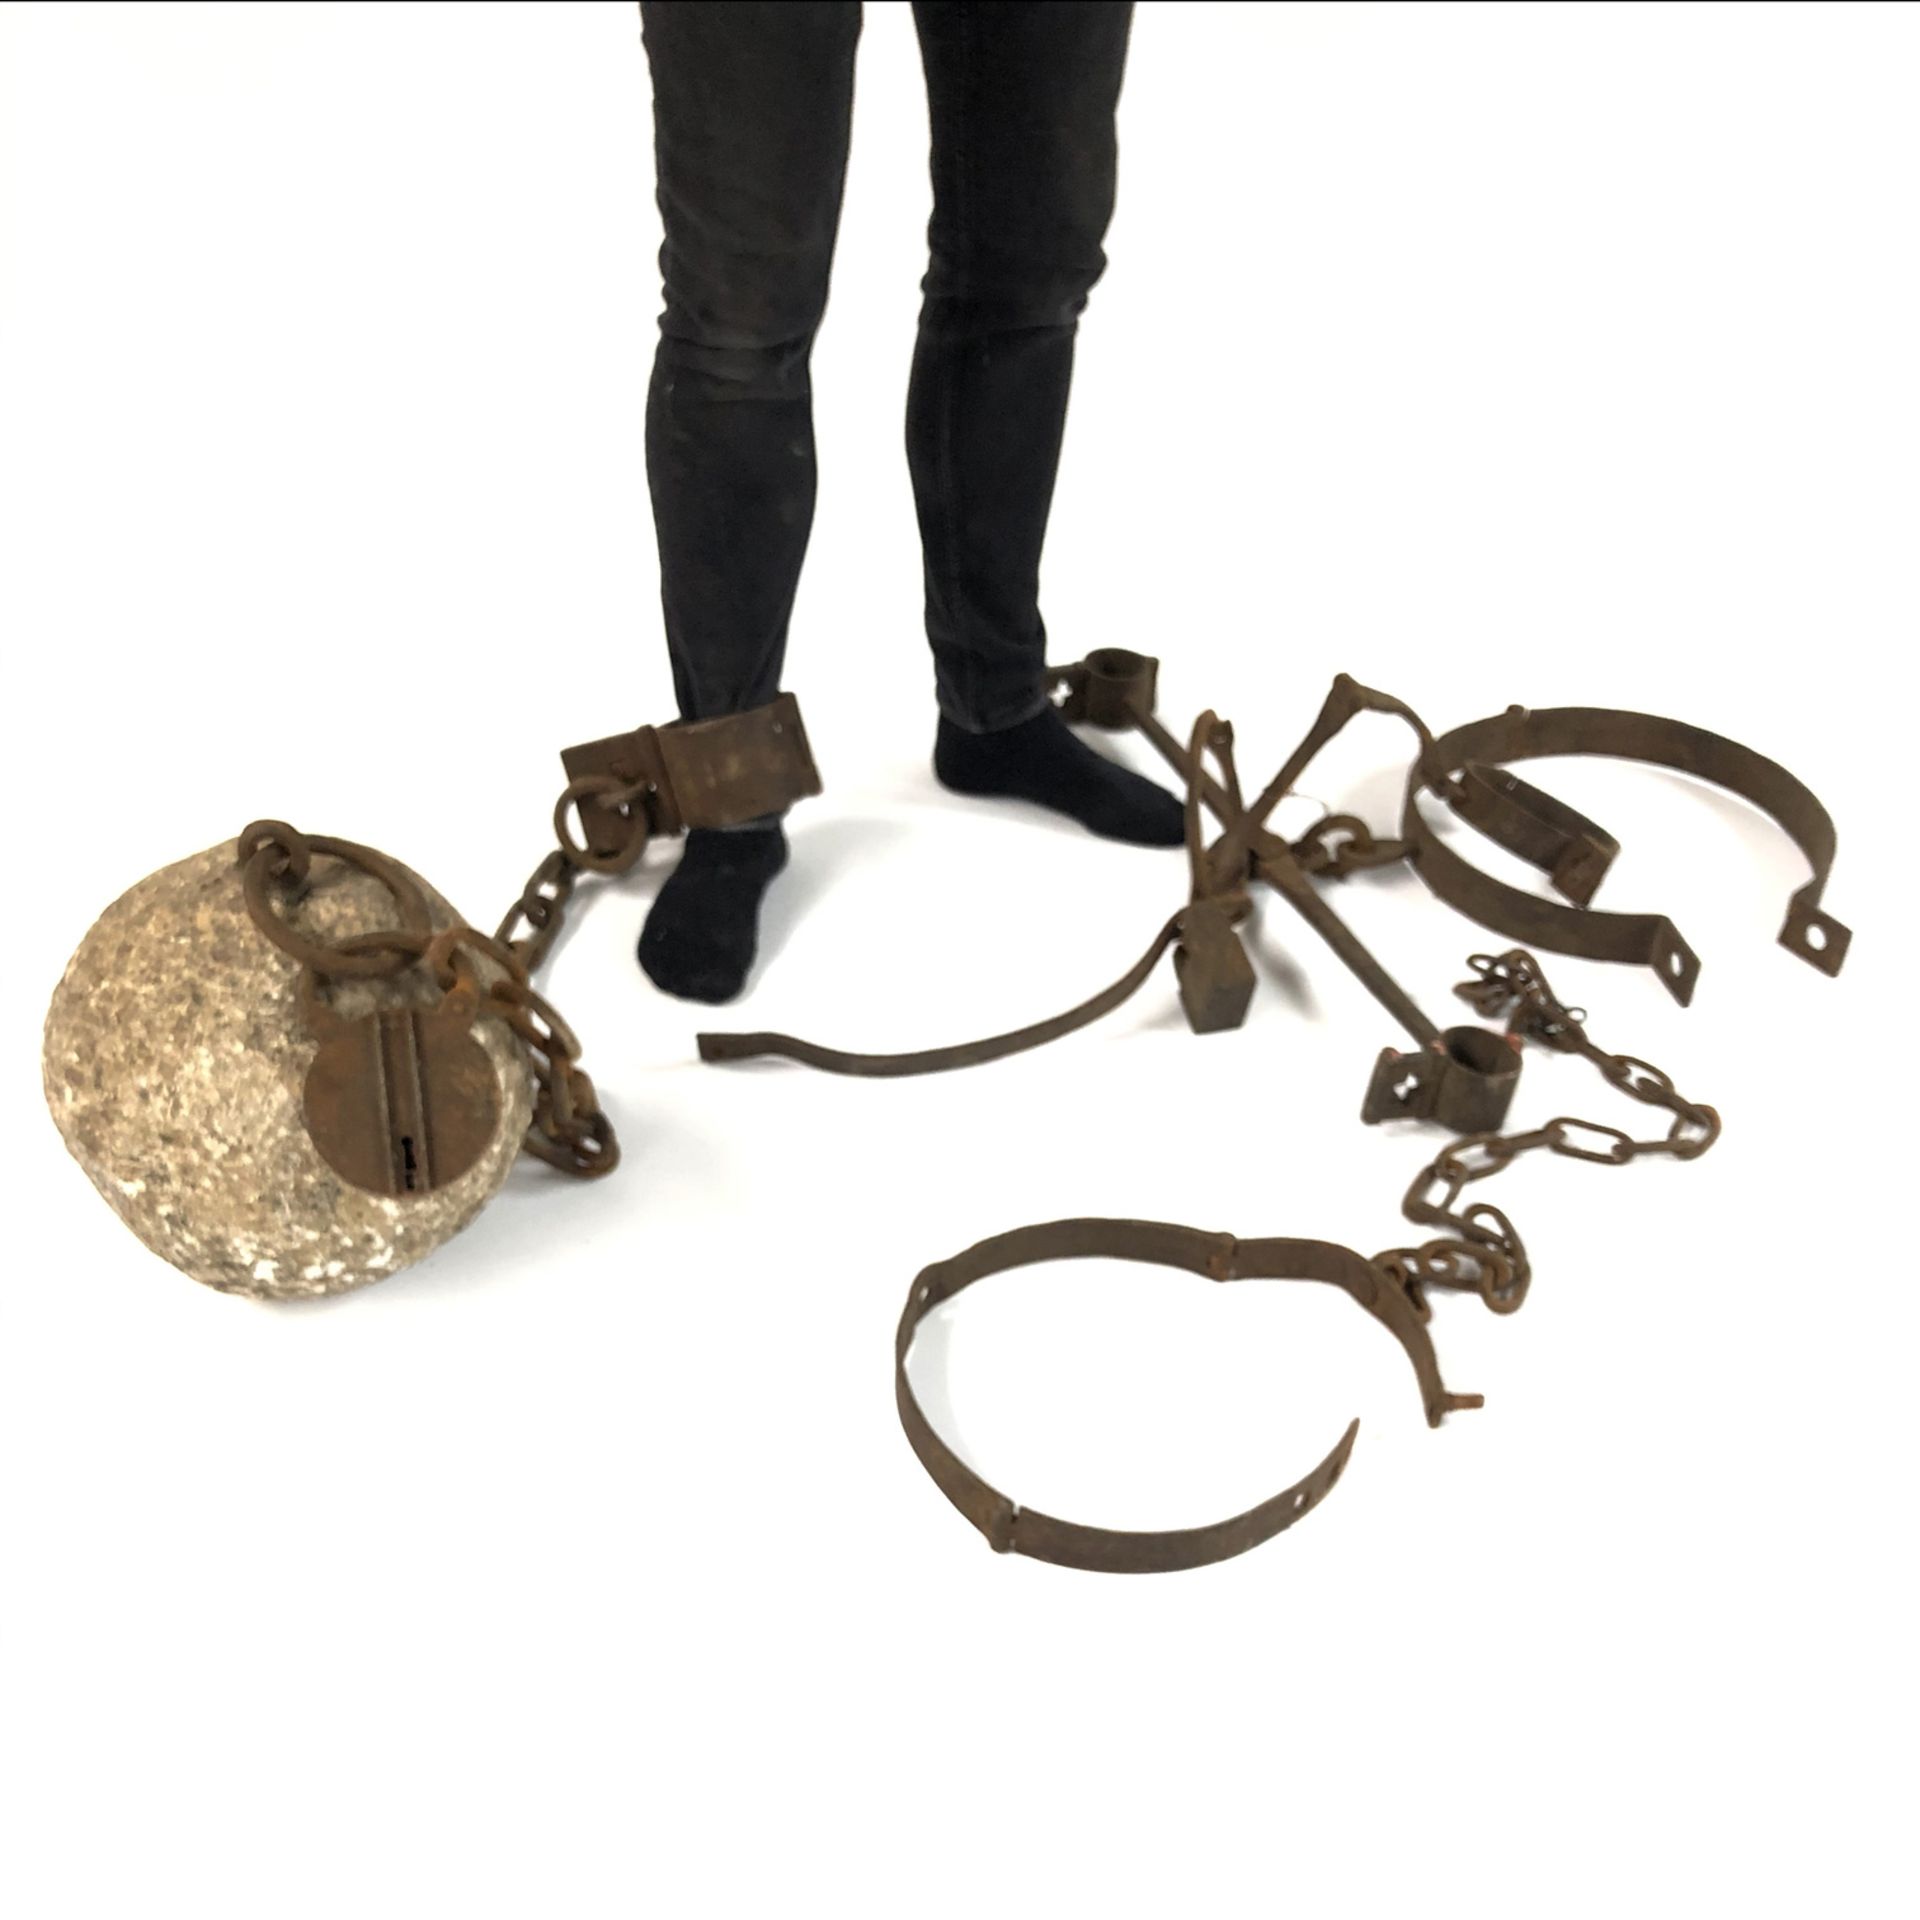 Antique Medieval Shackles ca. 1700 - Image 3 of 3